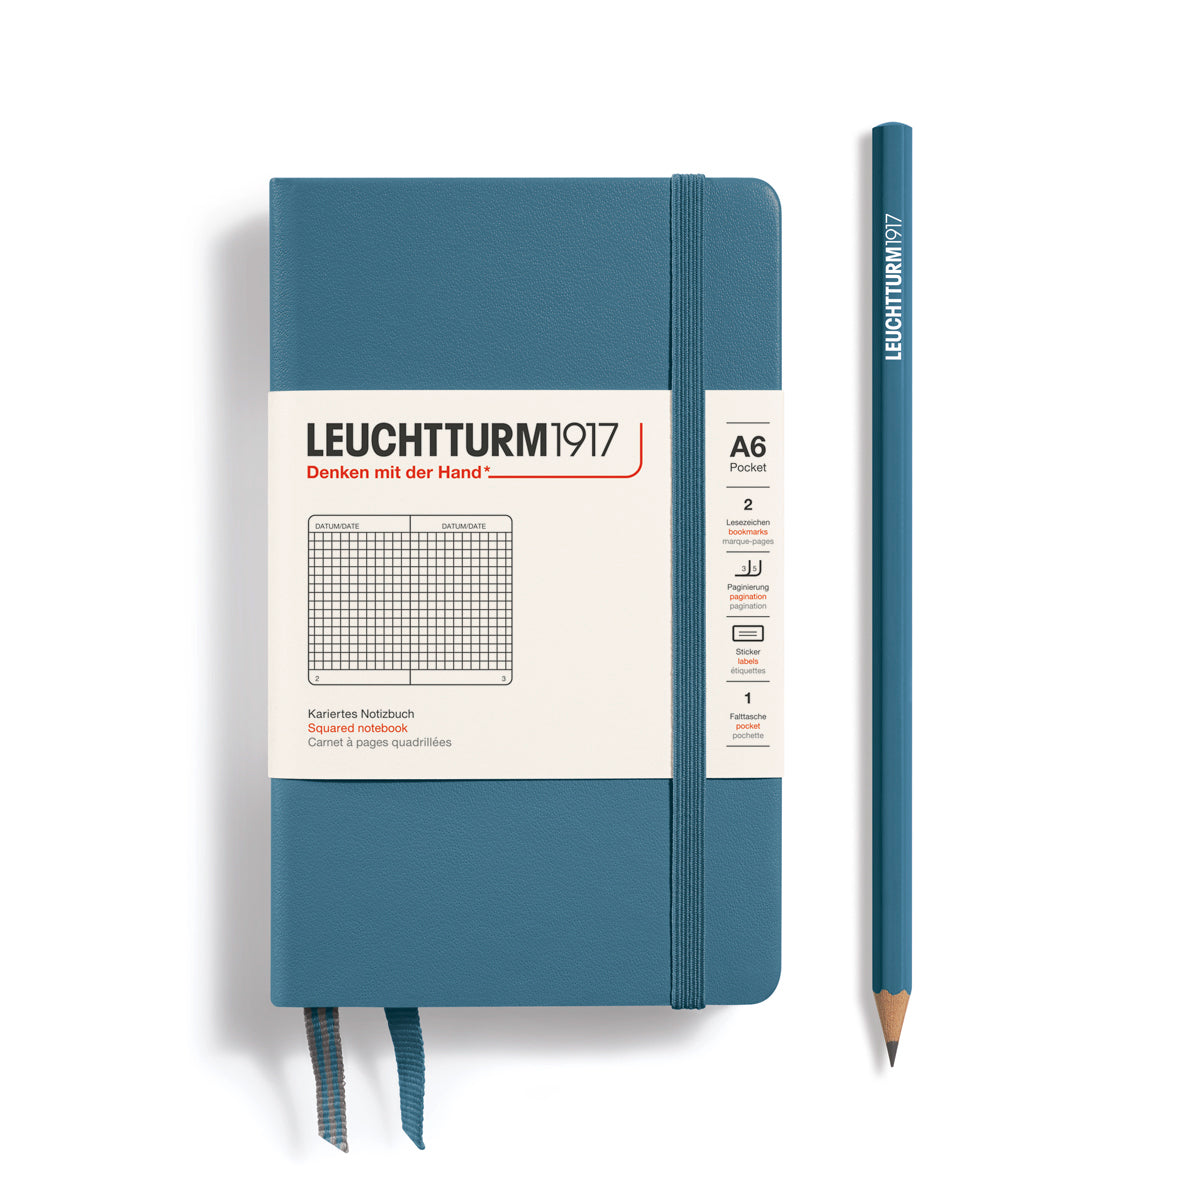 Leuchtturm1917 Notebook A6 Pocket Hardcover in stone blue and squared ruling from penny black